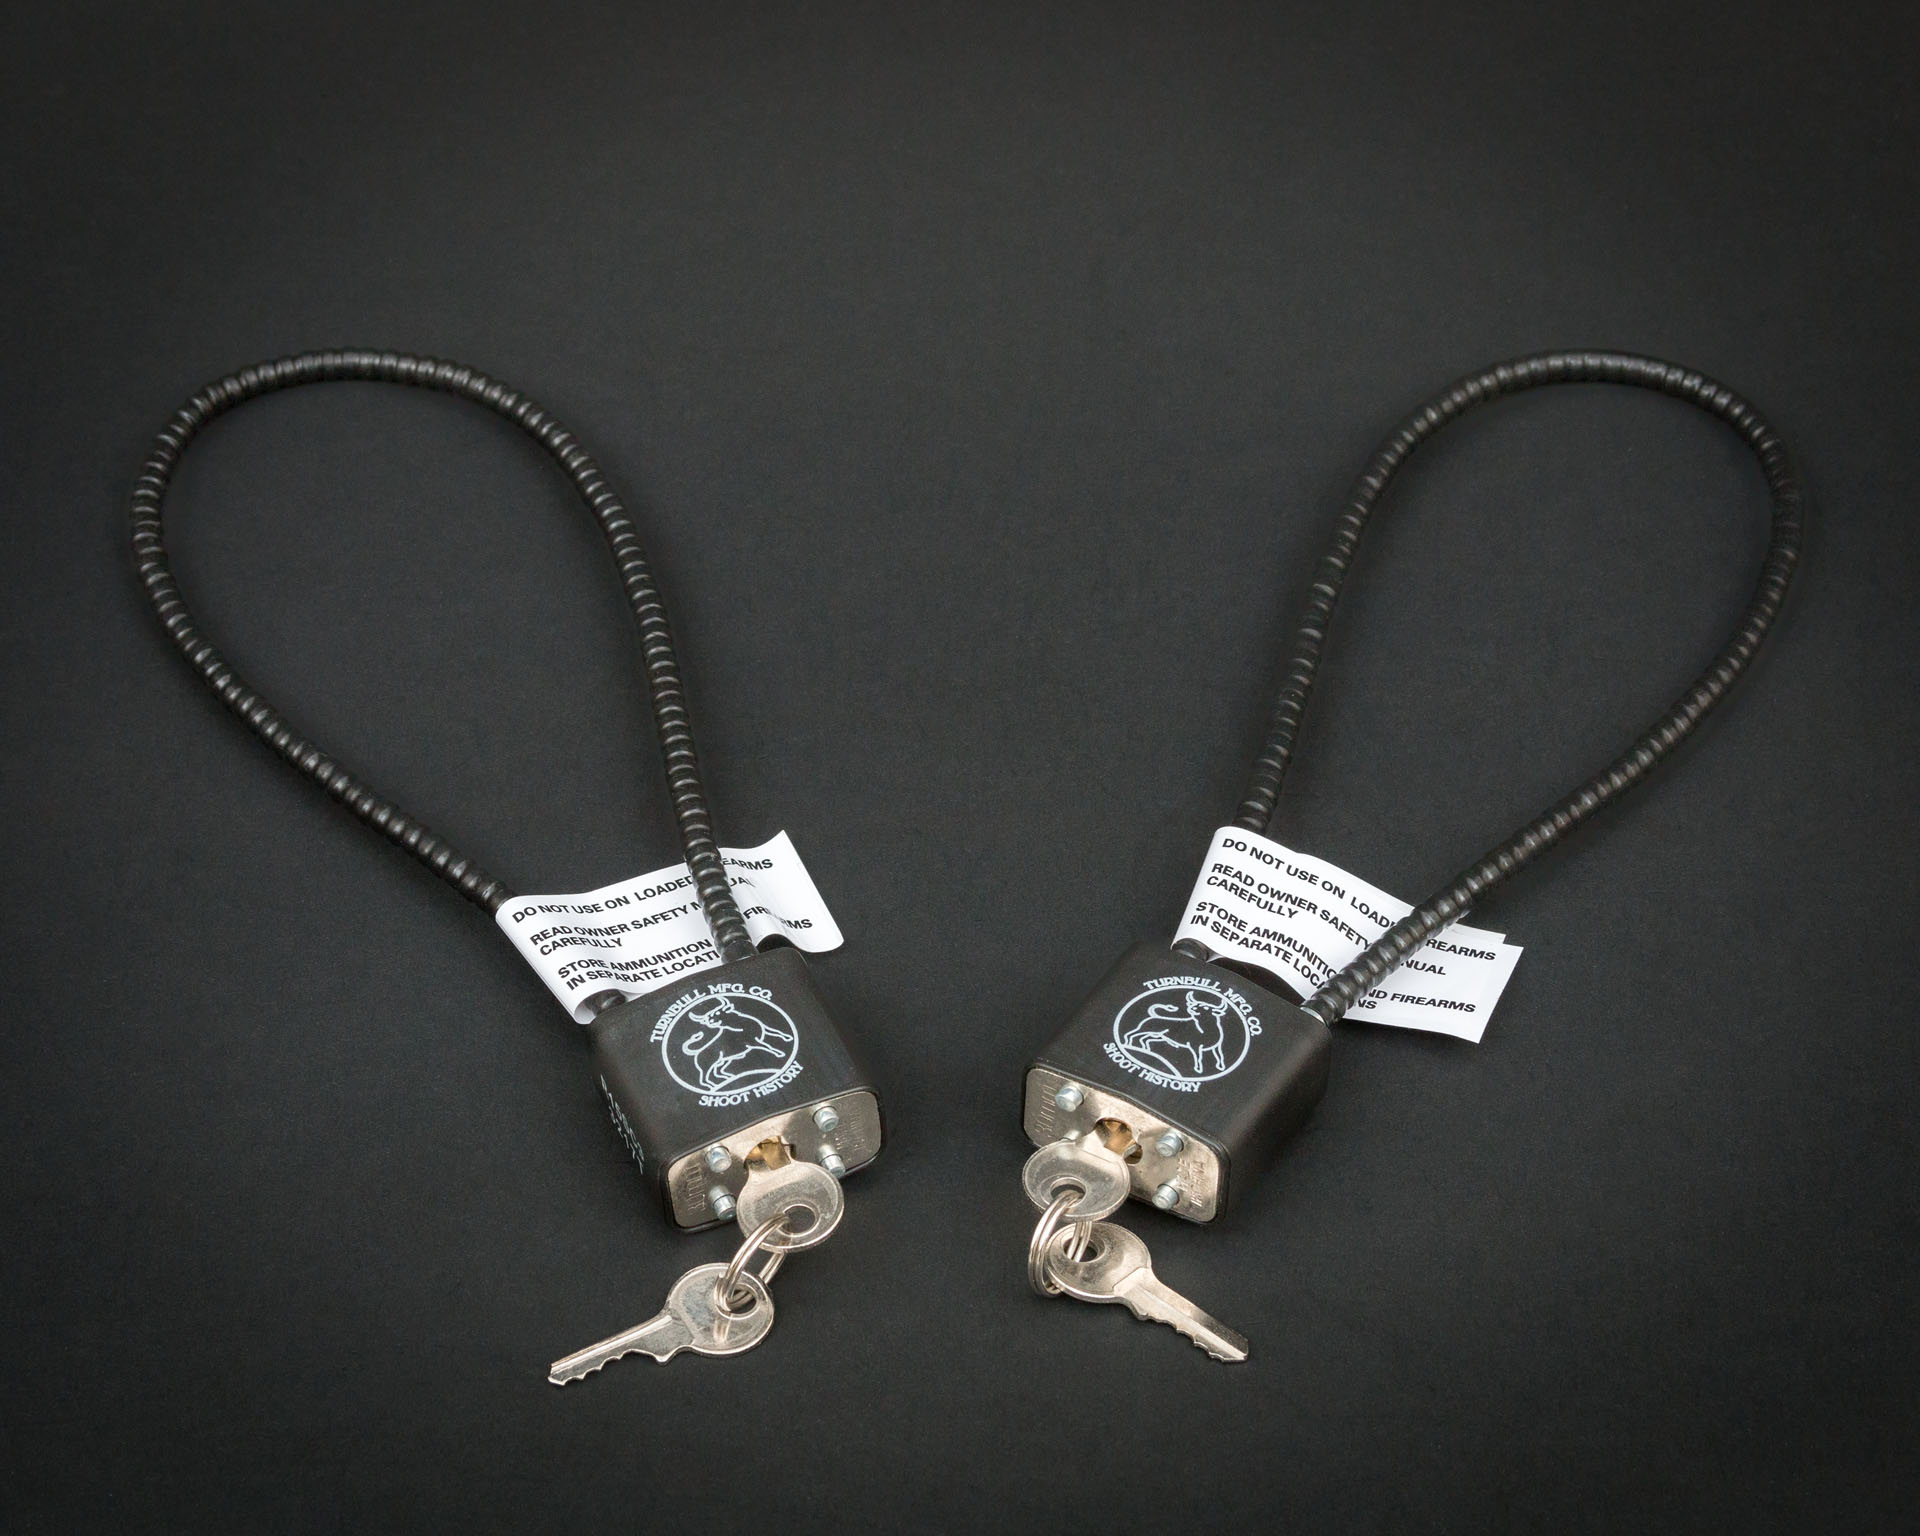 Cable lock pair from the Turnbull Restoration 2023 Gift Set